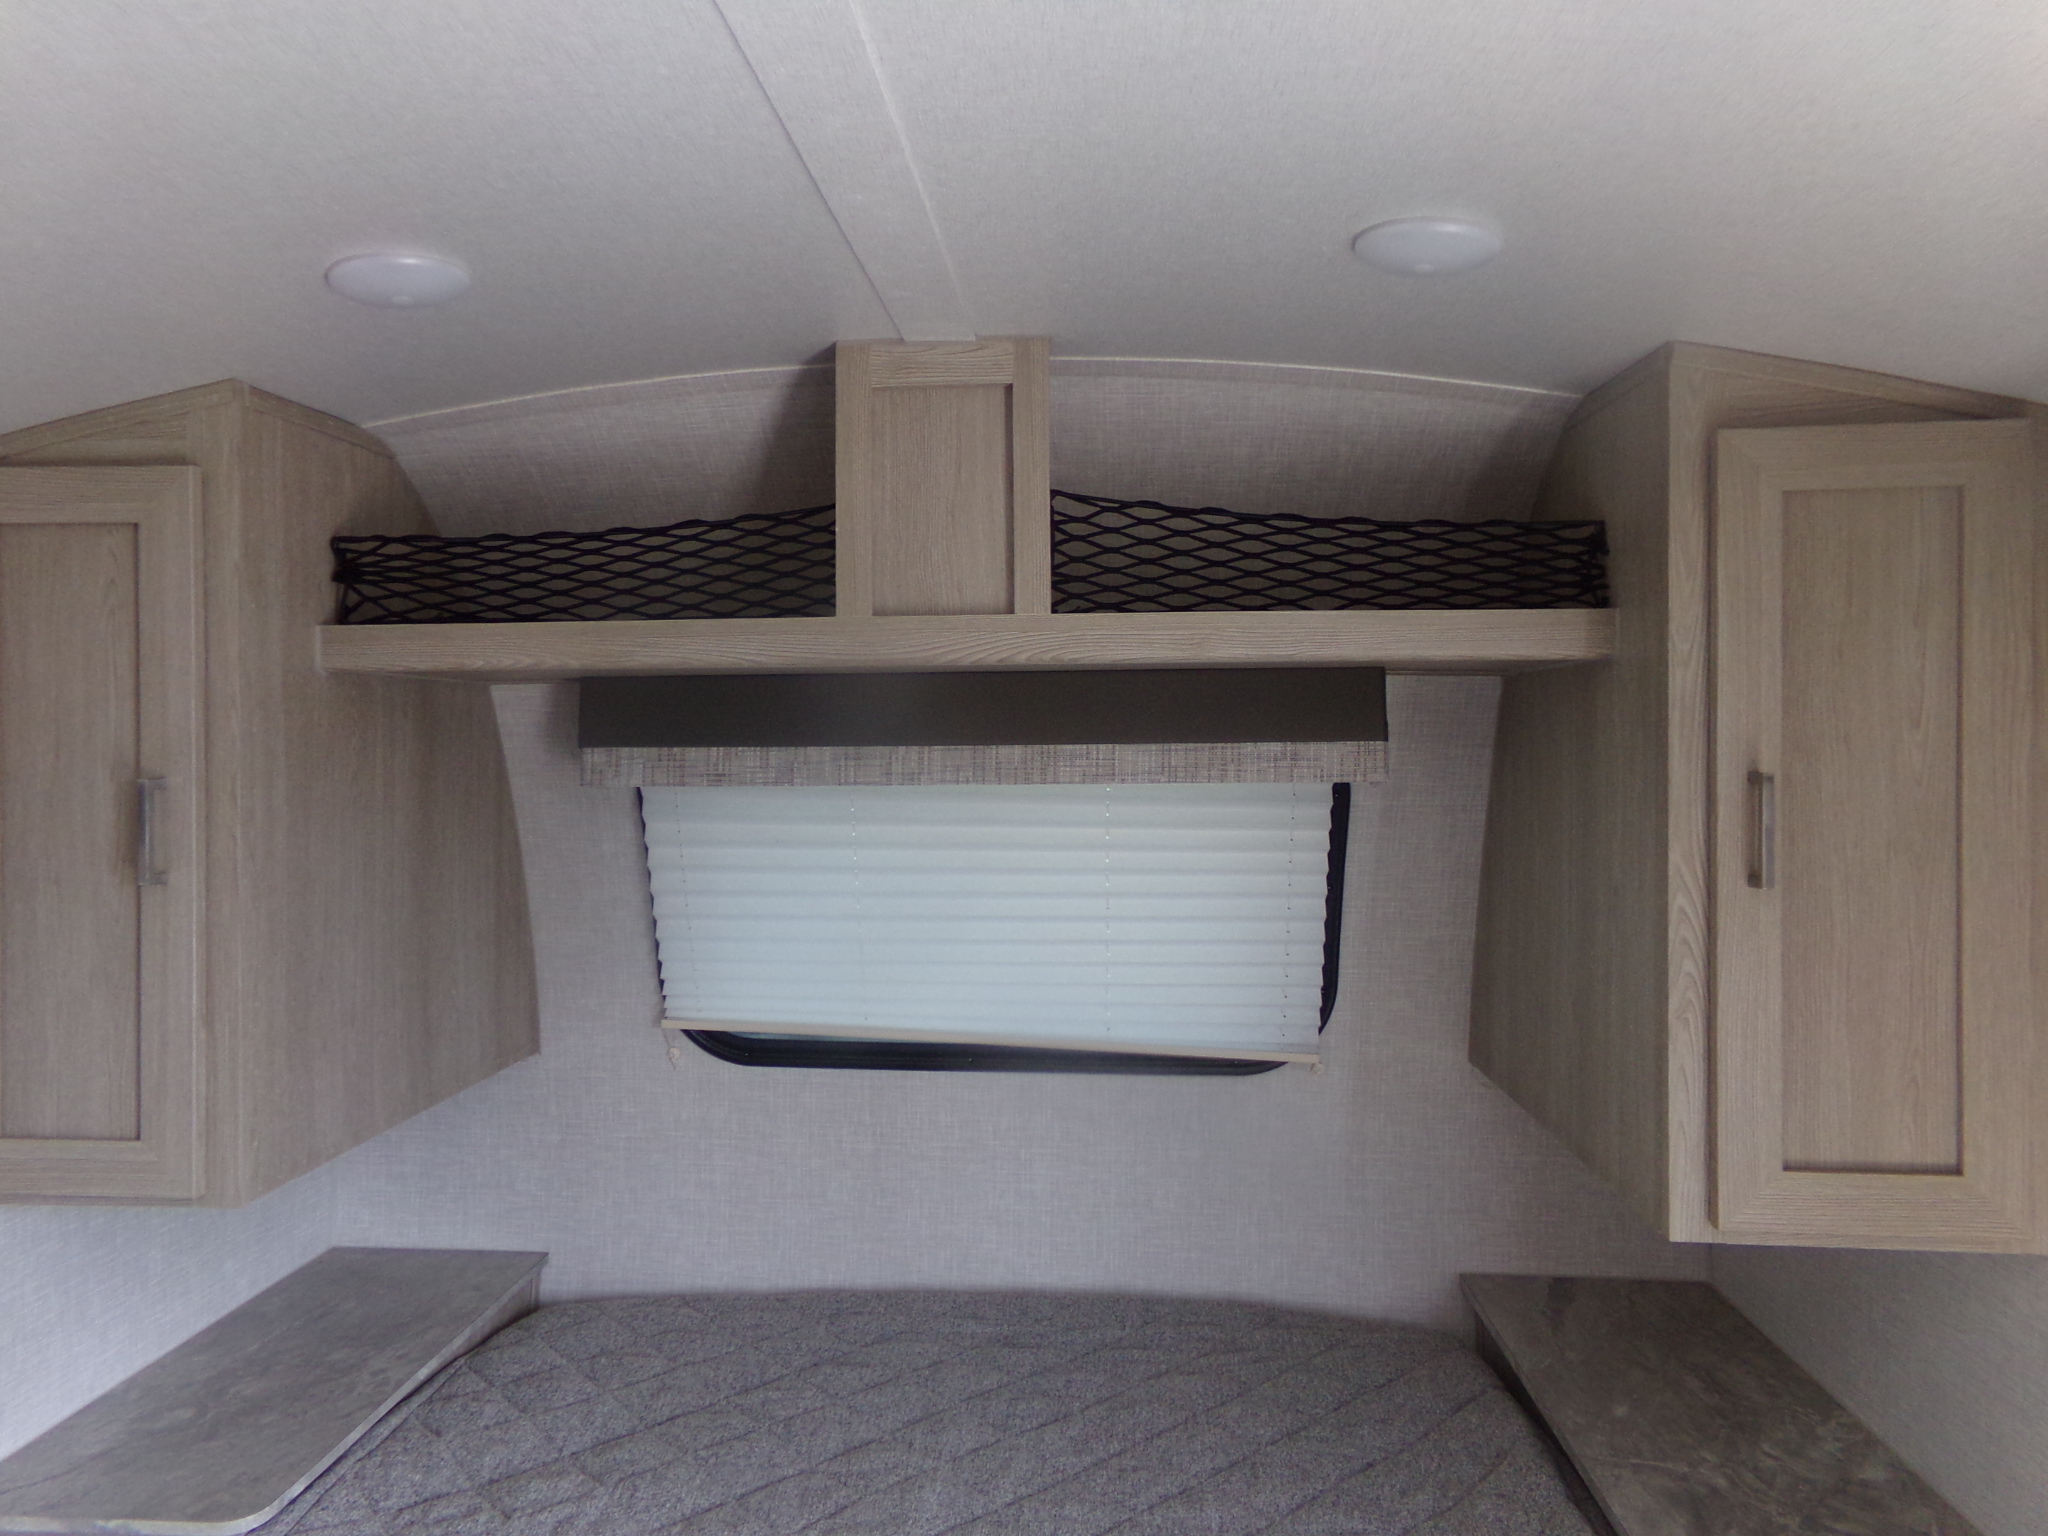 New Travel Trailer within driving distance of Yadkinville, NC.